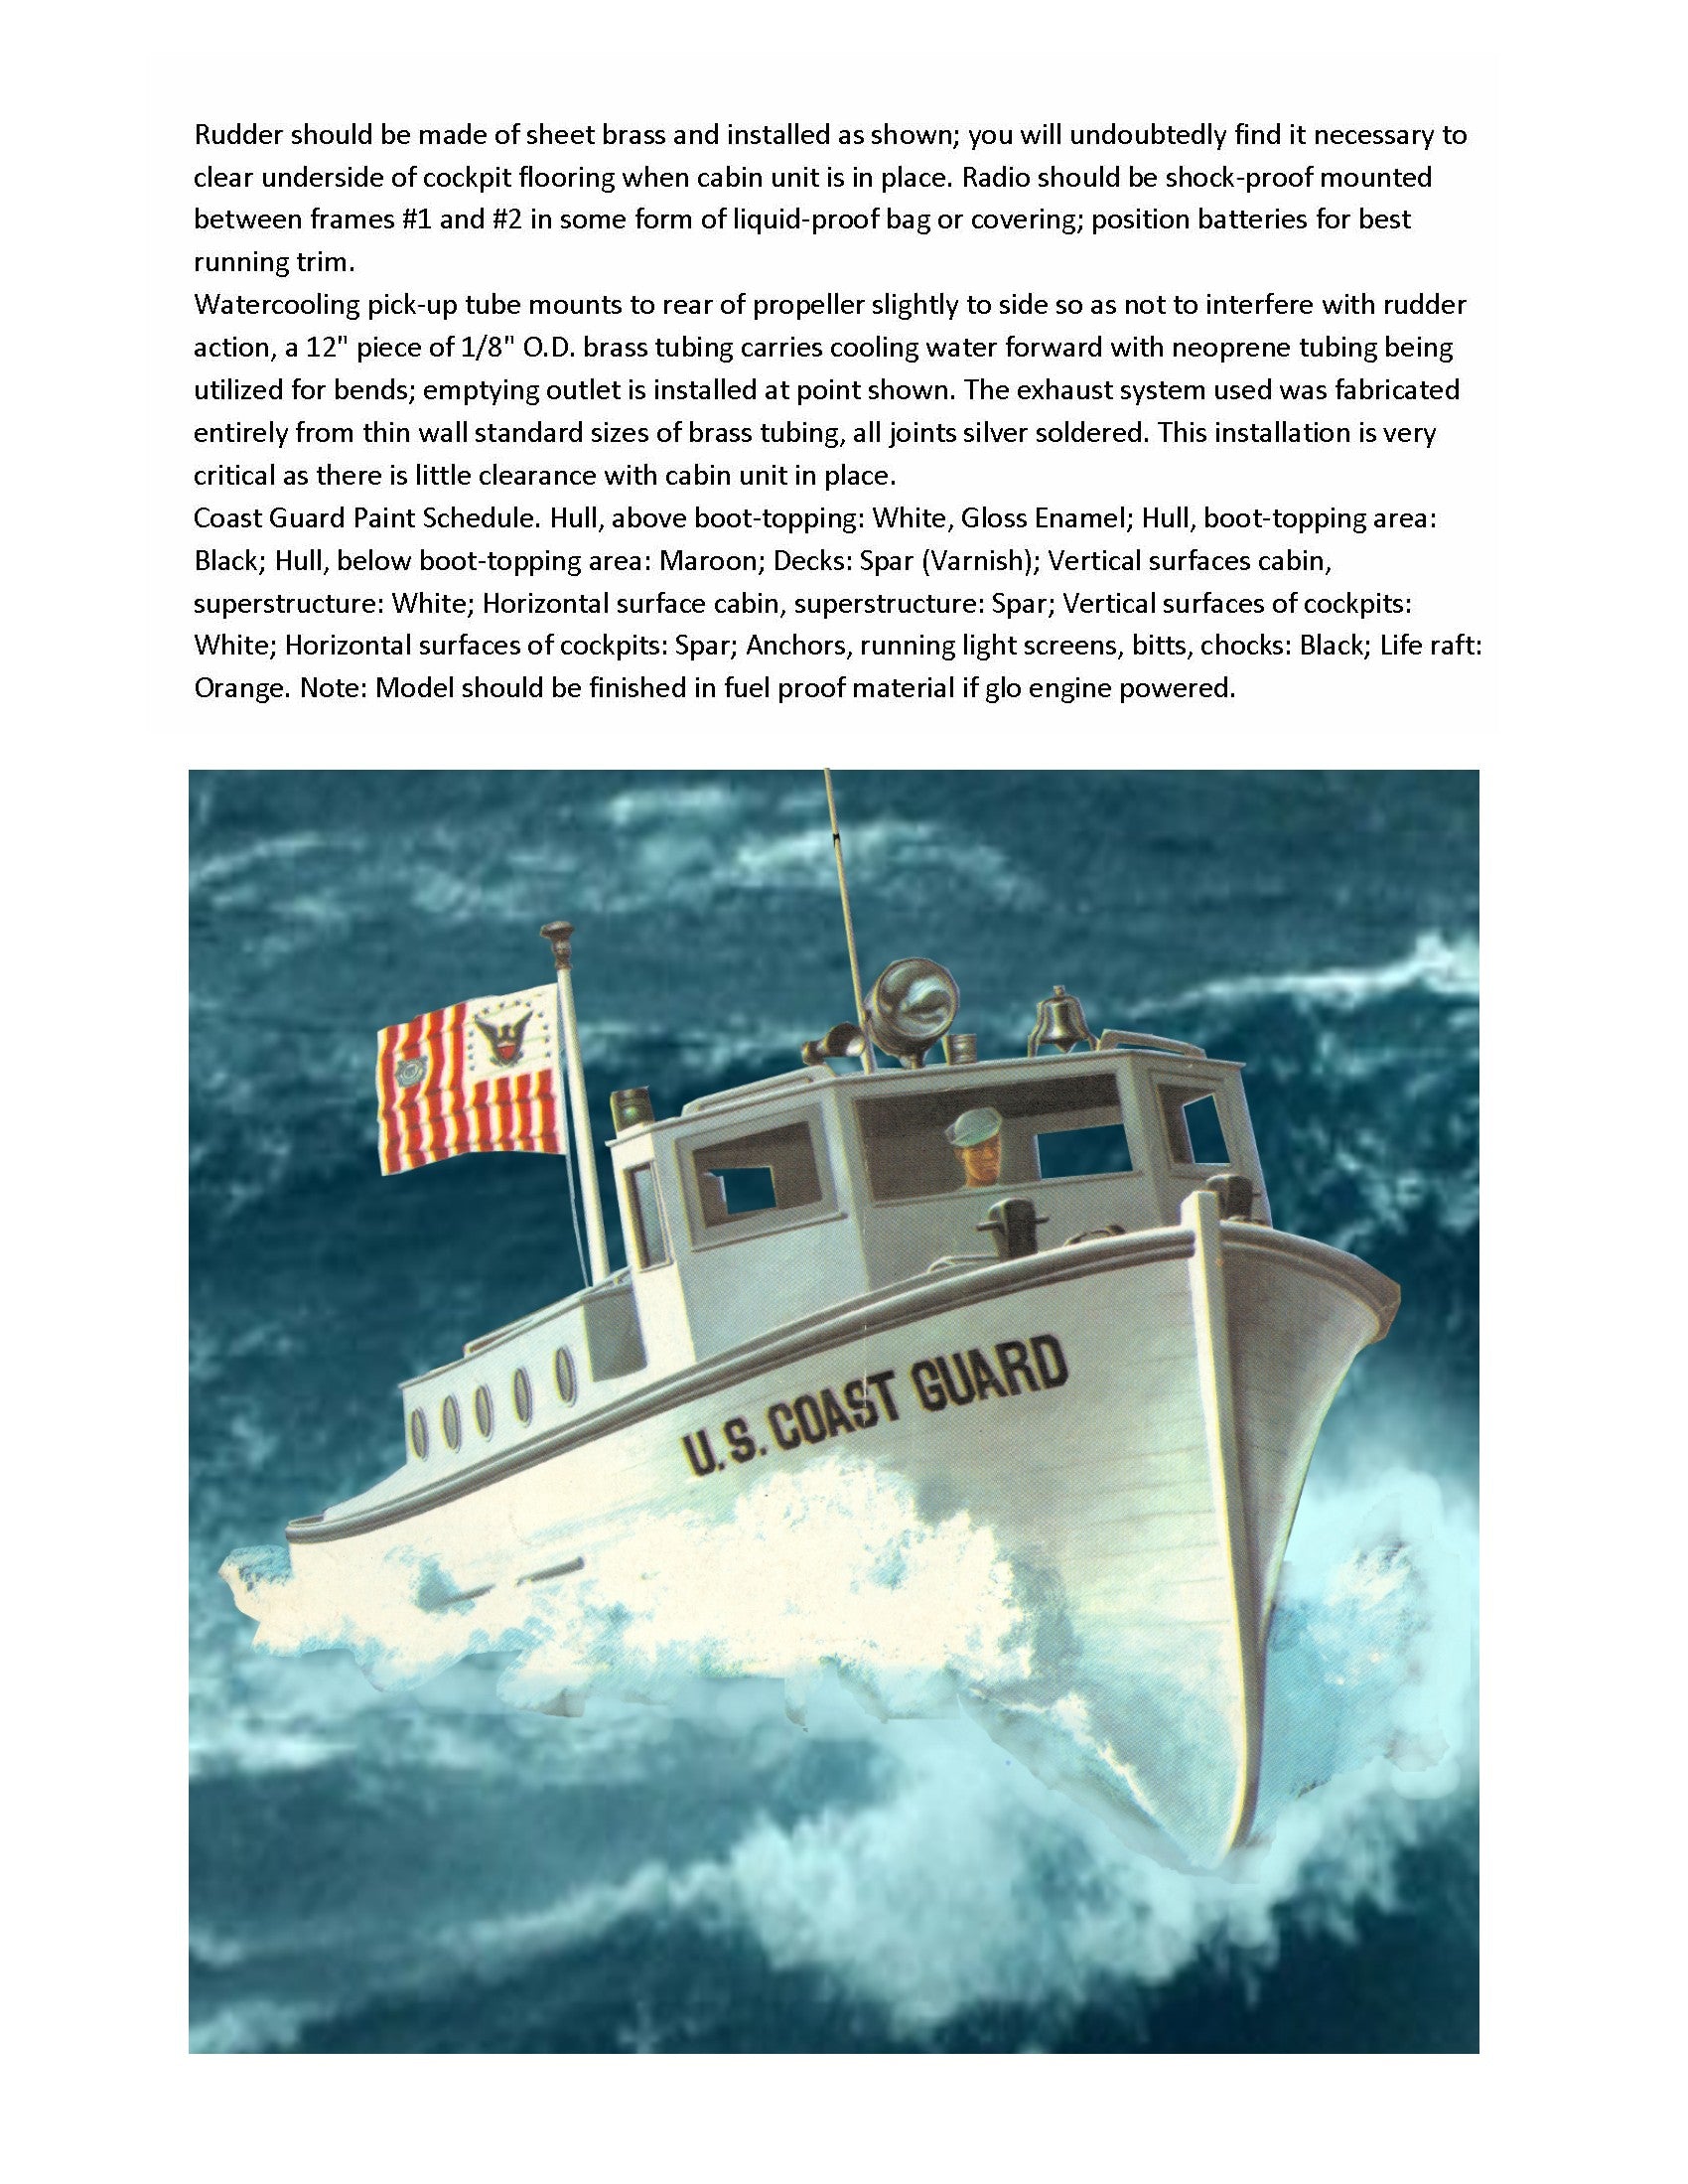 full size printed plans scale 1:16 u.s.c.g. coastguard picket boat she's big, beautiful and perfect for radio control